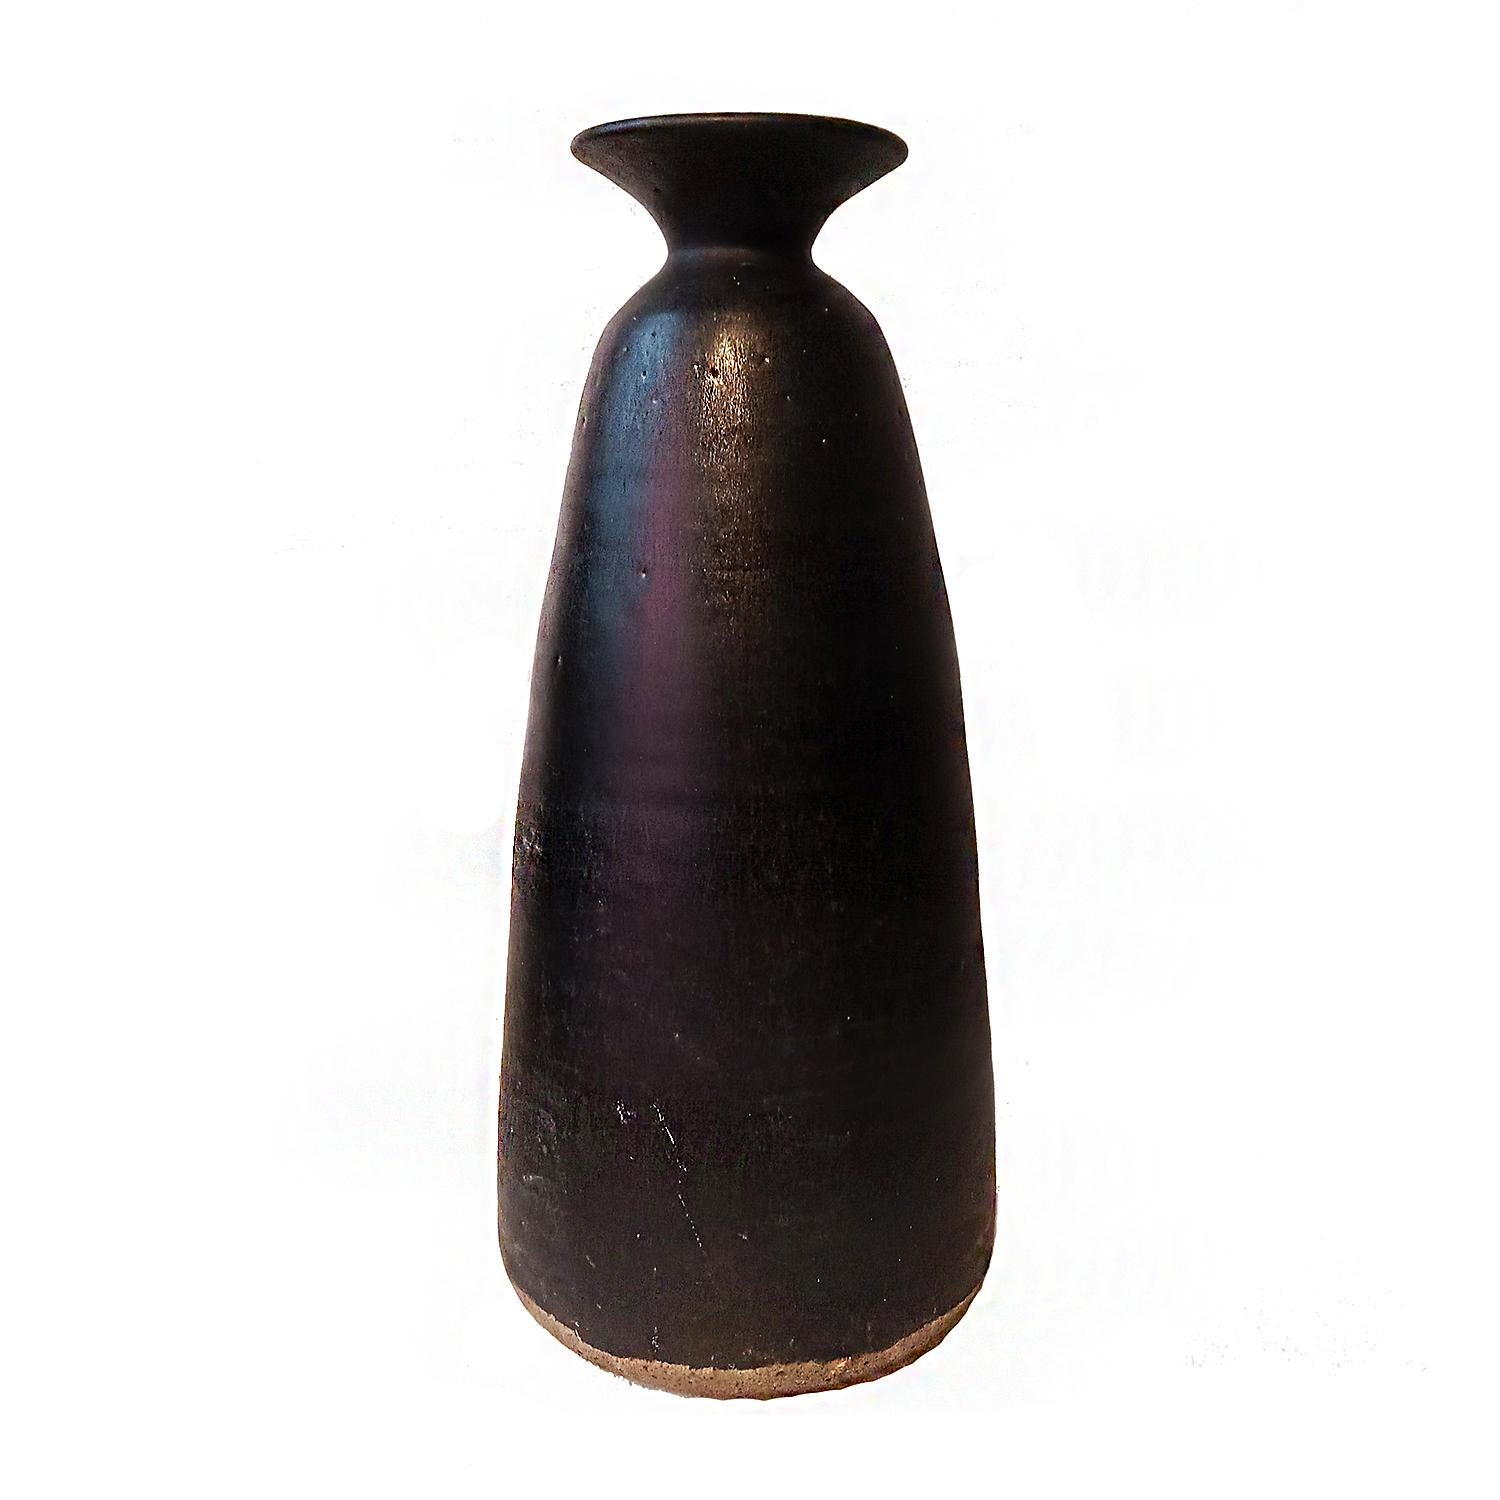 A tall ceramic vase / urn with black glaze. Hand-crafted in Thailand, in the tradition of antique Thai earthenware. Circa 1970. 

Sawankhalok, one of the main centers of ancient Thai ceramics, was known for its green celadon glaze. But it also